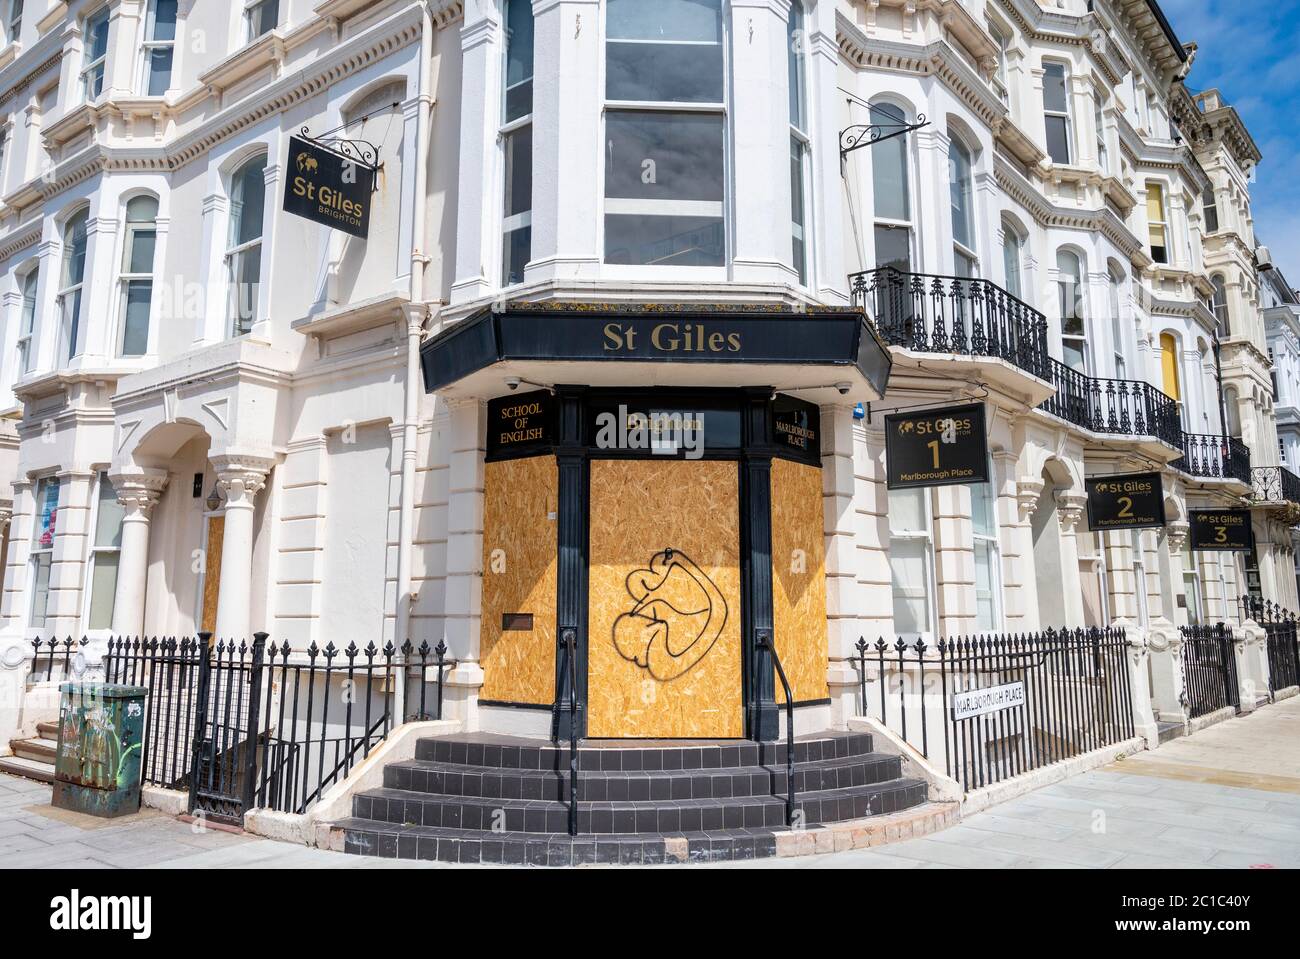 The St Giles English Language School for foreign students in Brighton which has been boarded up during the coronavirus COVD-19 lockdown in the UK Stock Photo